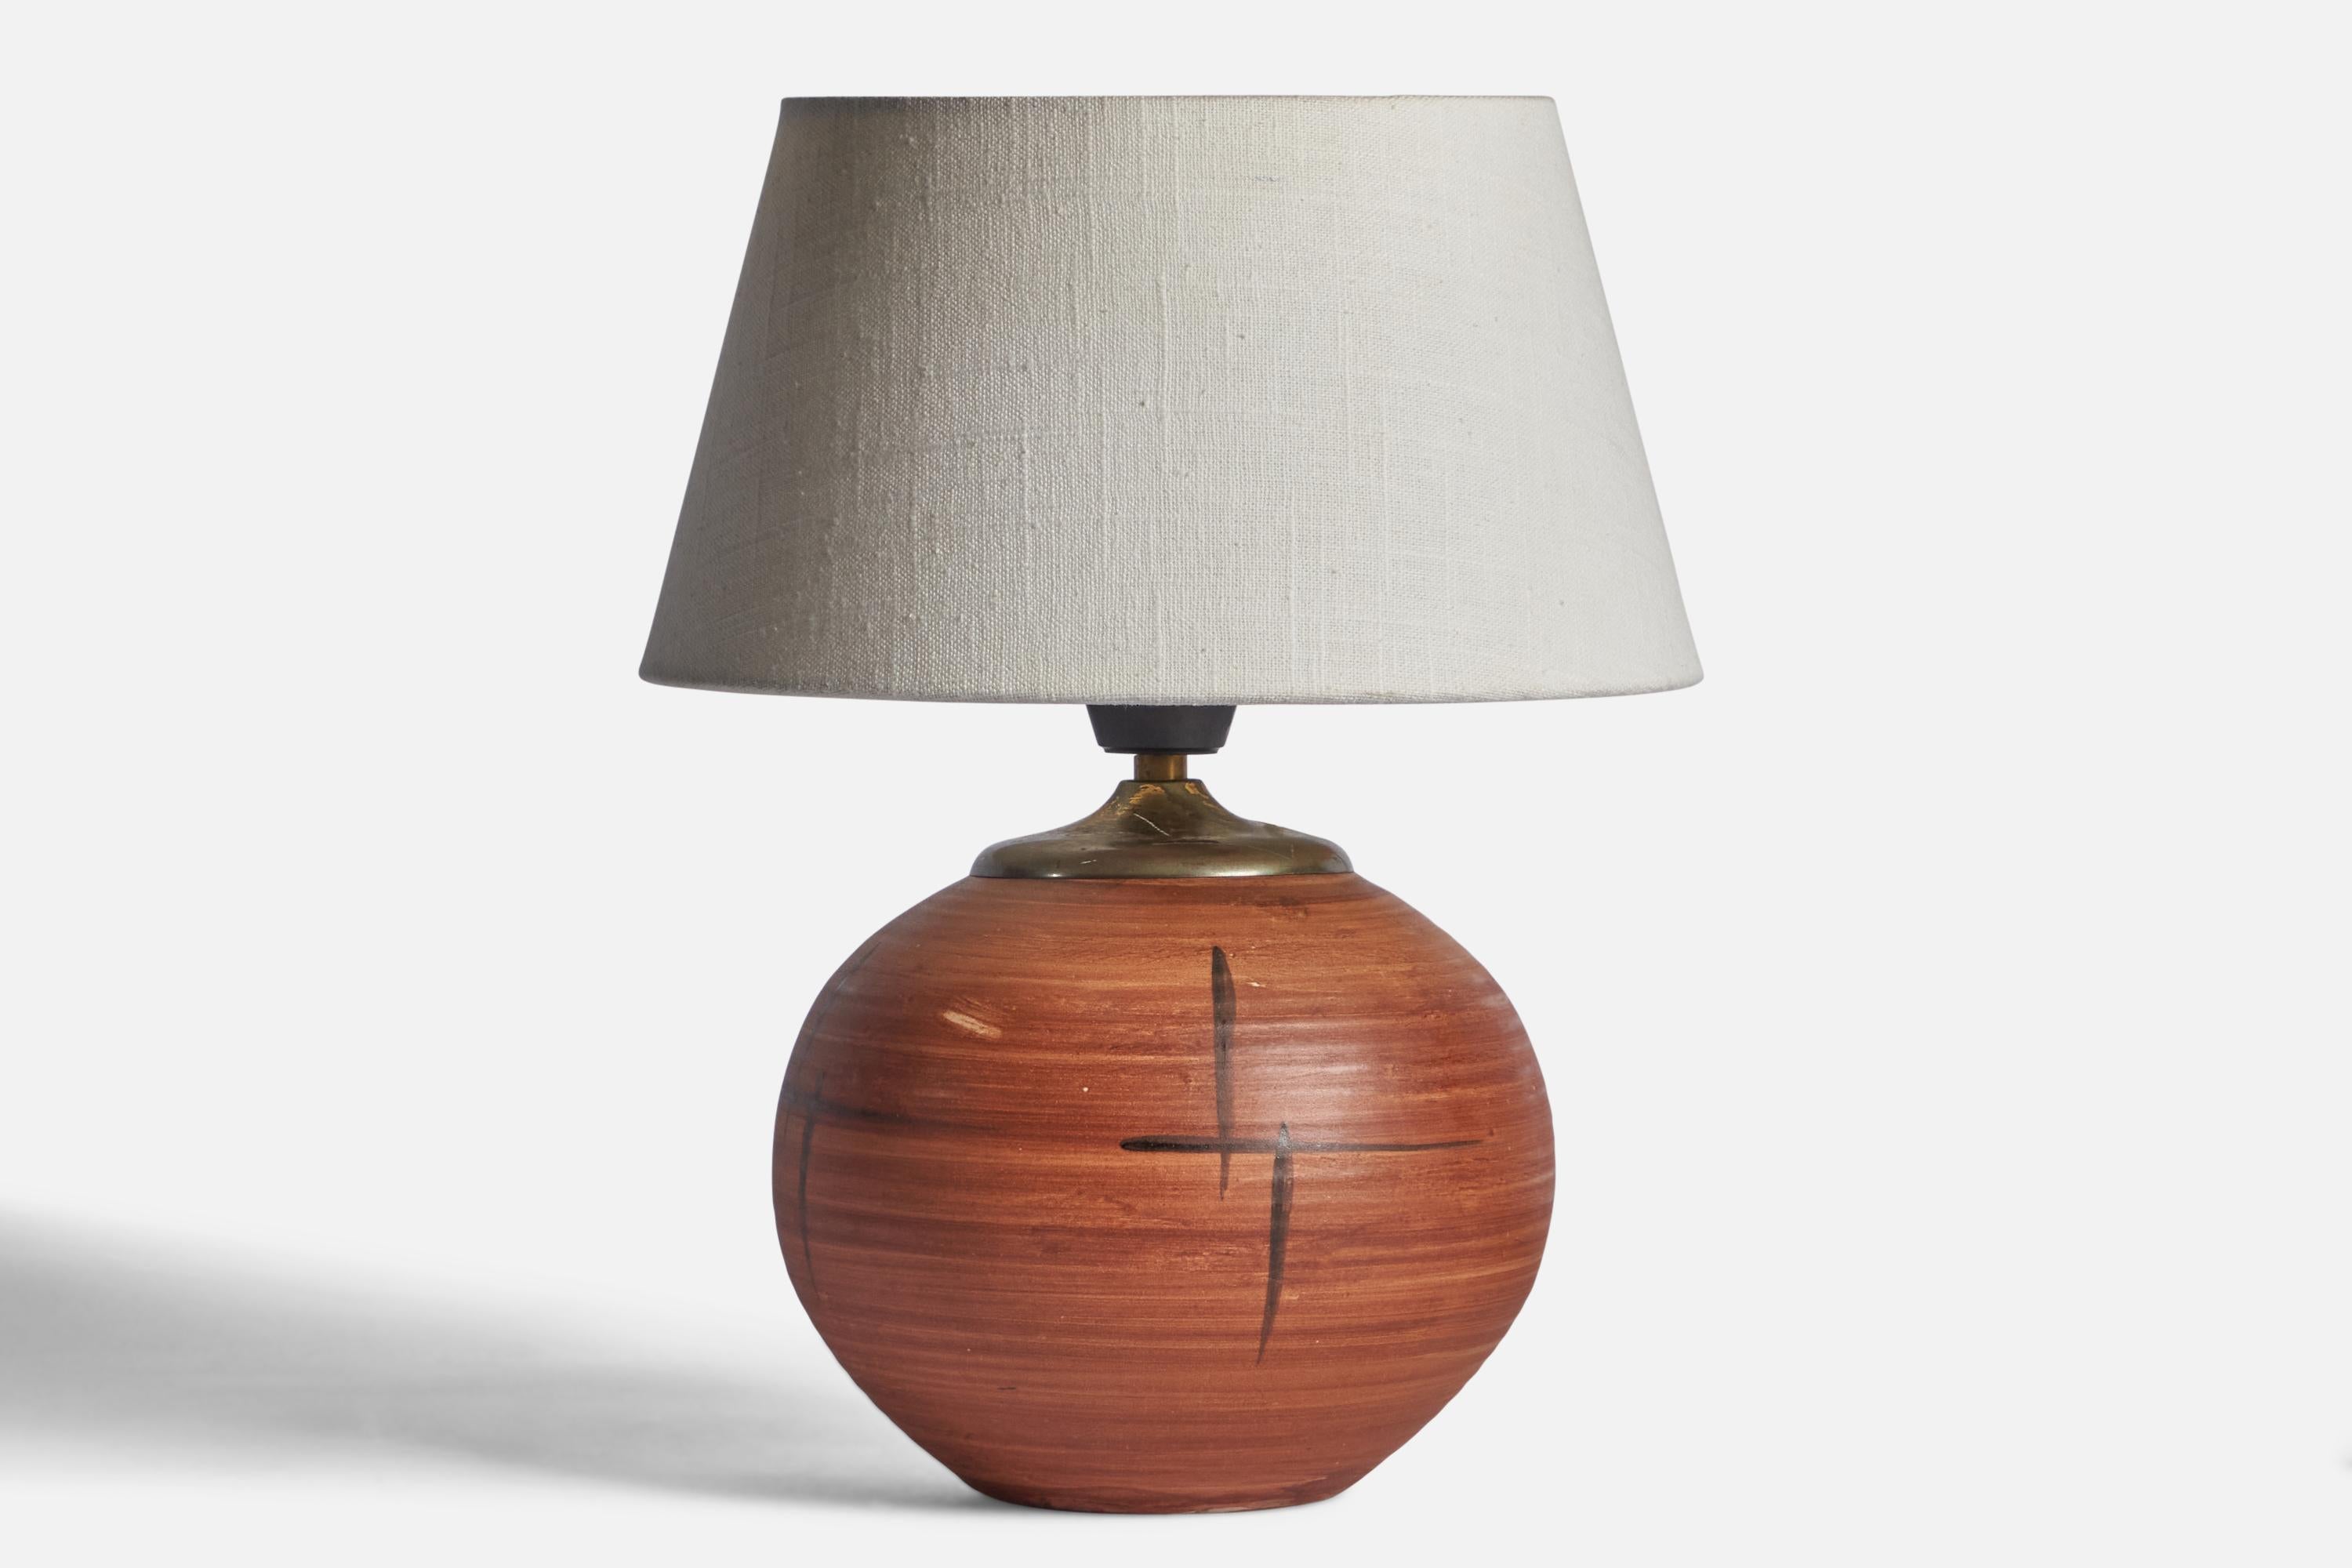 A brown-glazed hand-painted earthenware and brass table lamp designed and produced by Upsala Ekeby, Sweden, c. 1930s.

Dimensions of Lamp (inches): 10.25” H x 7” Diameter
Dimensions of Shade (inches): 7” Top Diameter x 10” Bottom Diameter x